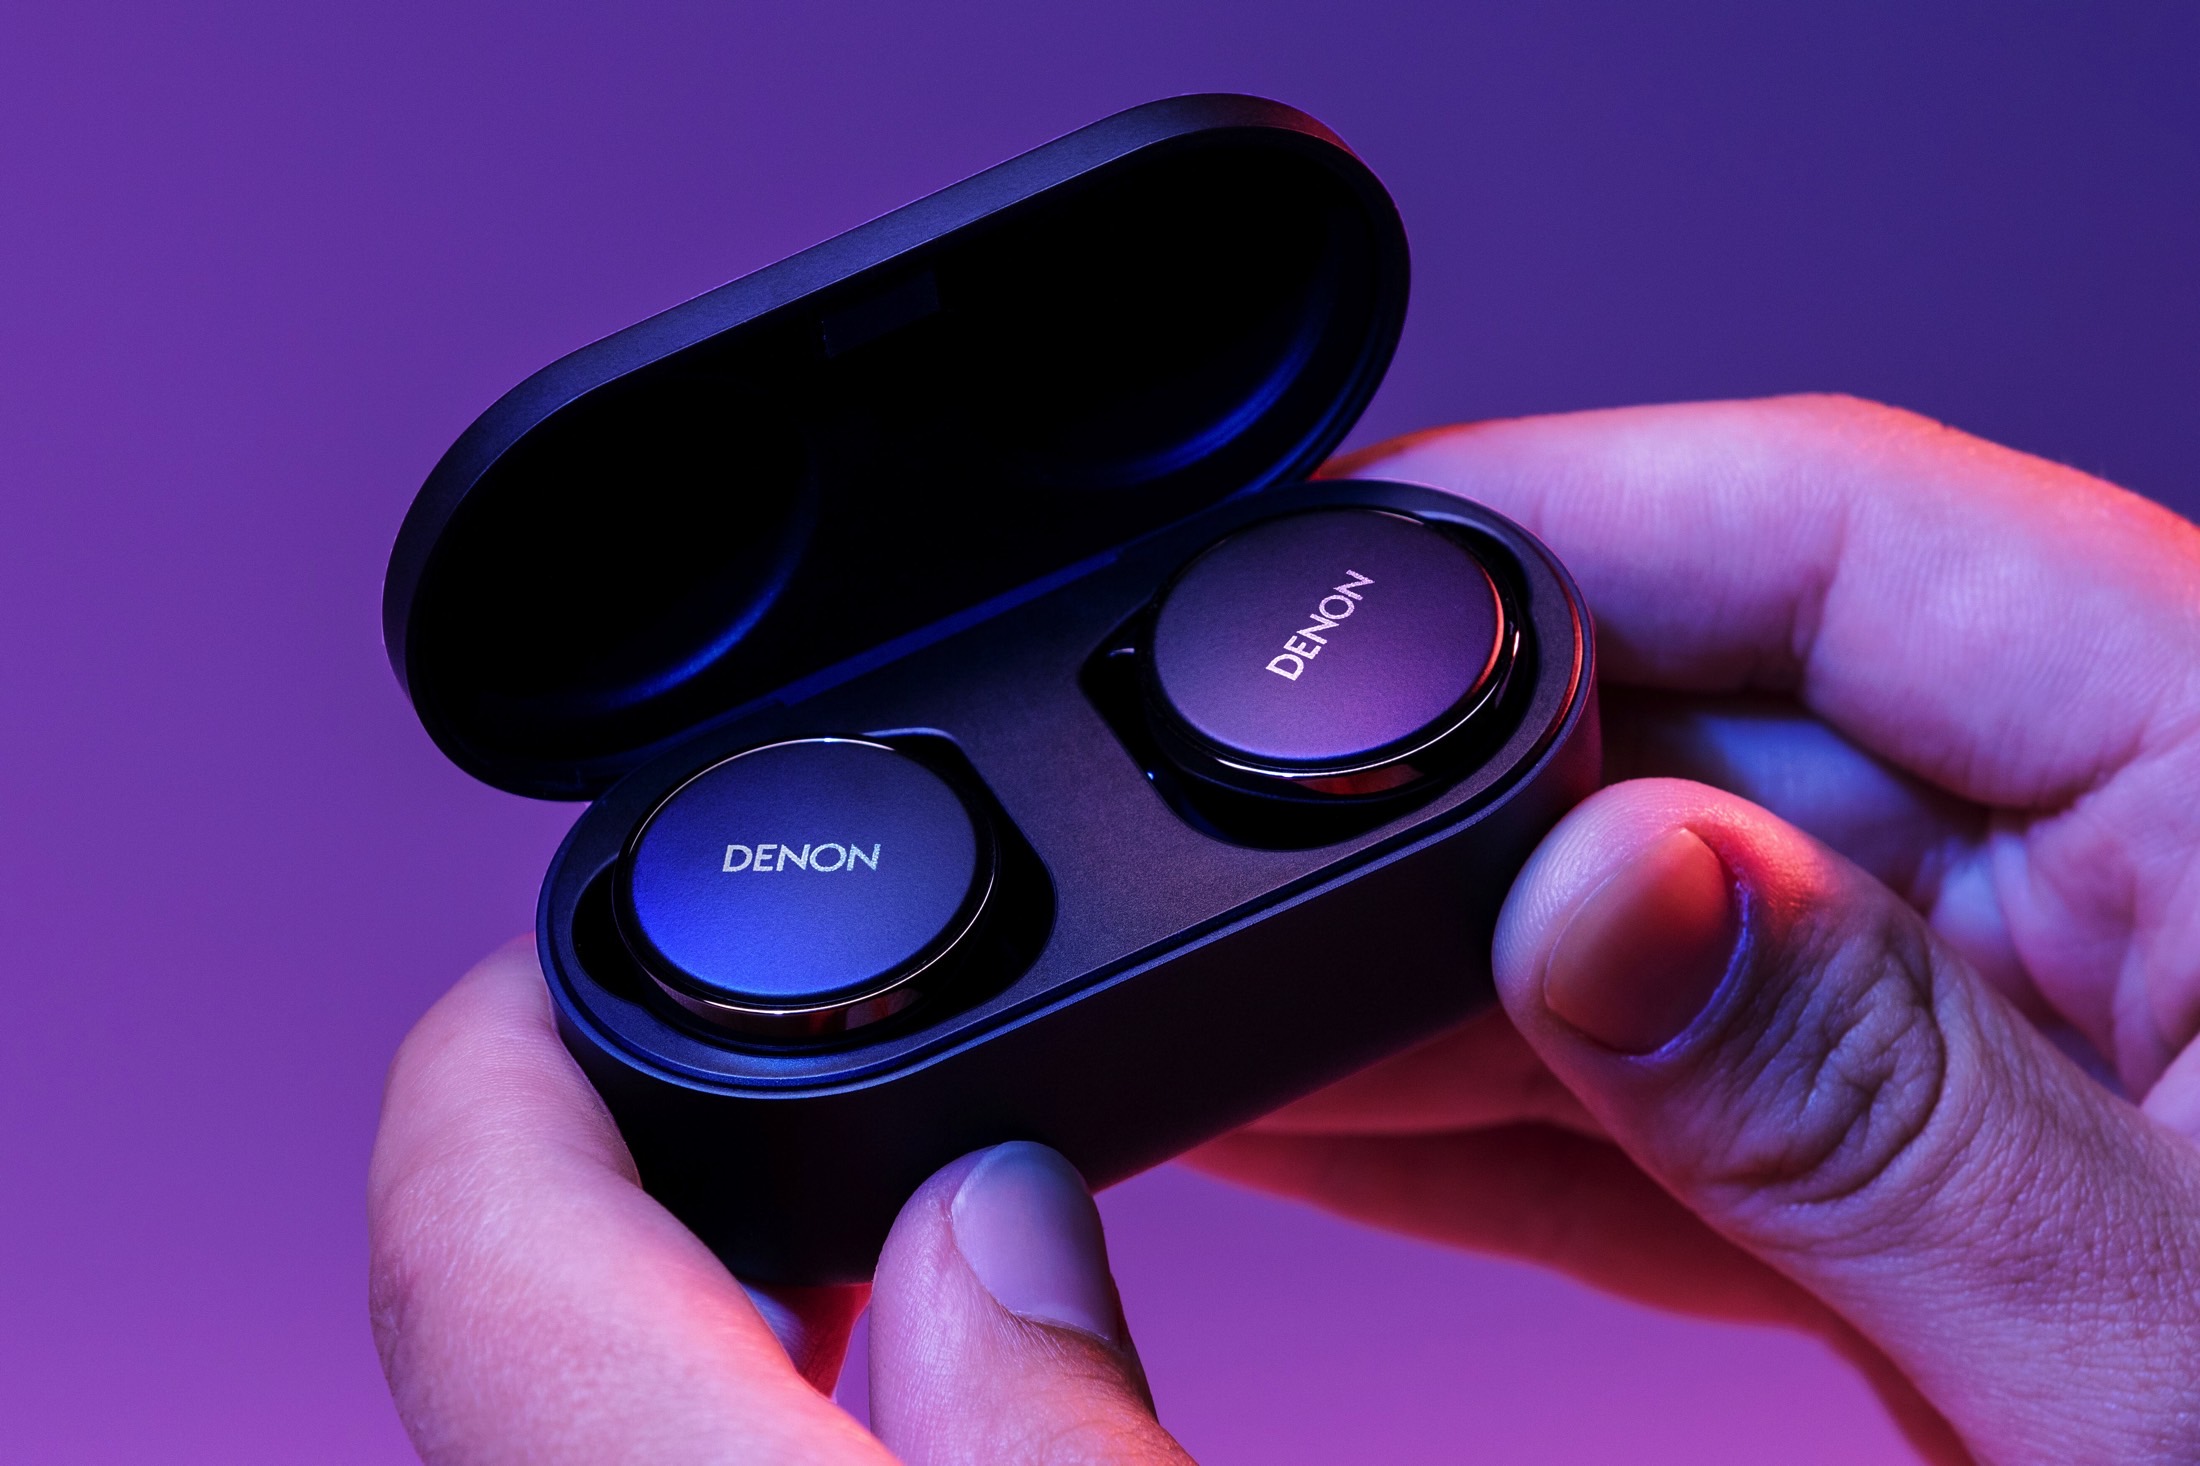 Nura\'s personalized earbuds are reborn the Trends Denon Perl Digital | as